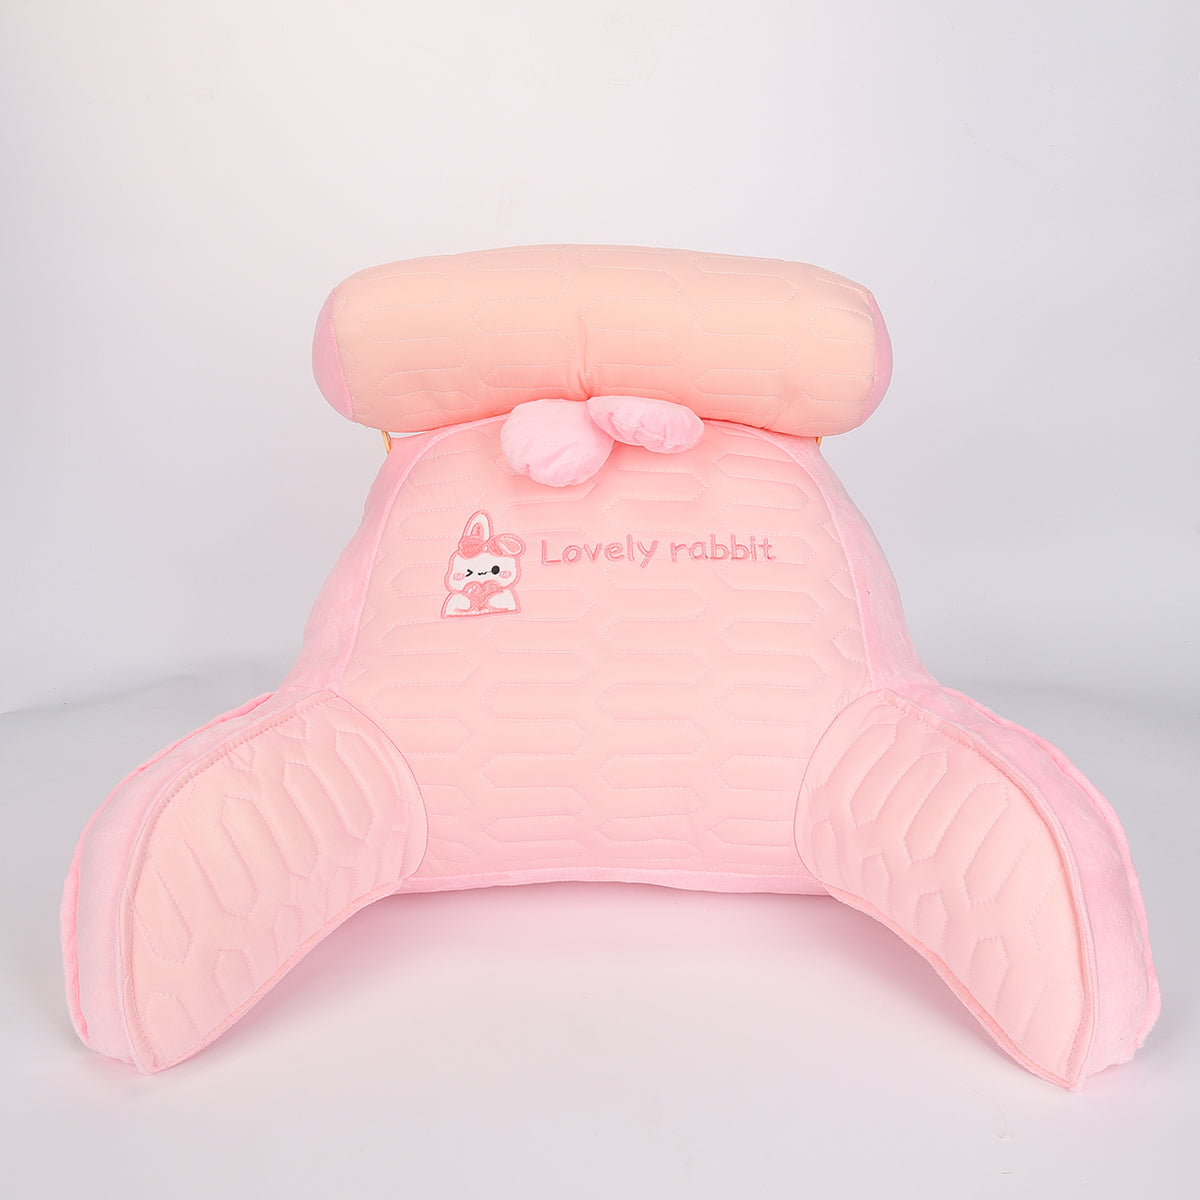 「Debut Sale」Colorful Cushion Series 2 Soft Olive Orange Pink Chair Cushion Seat Pad（Pre-order） - Aixini Toys